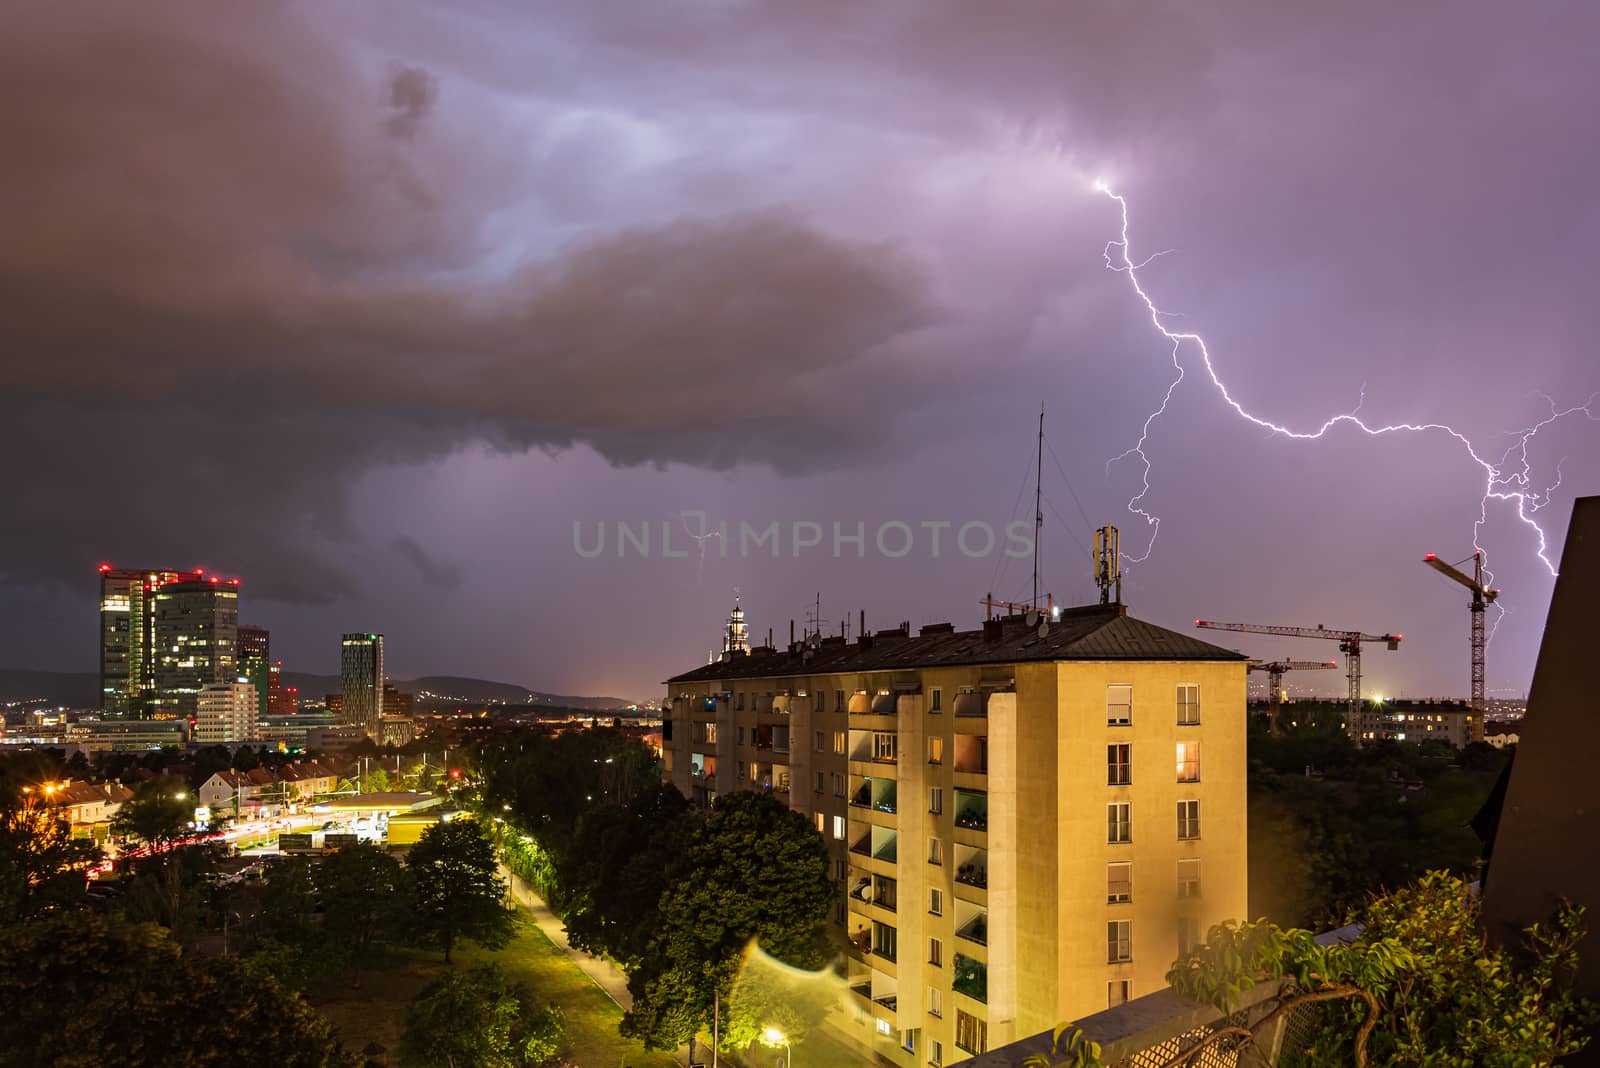 Violent summer thunderstorm with enormous lightning over the Wienerberg City in Vienna with construction cranes on the right side of the picture by Umtsga